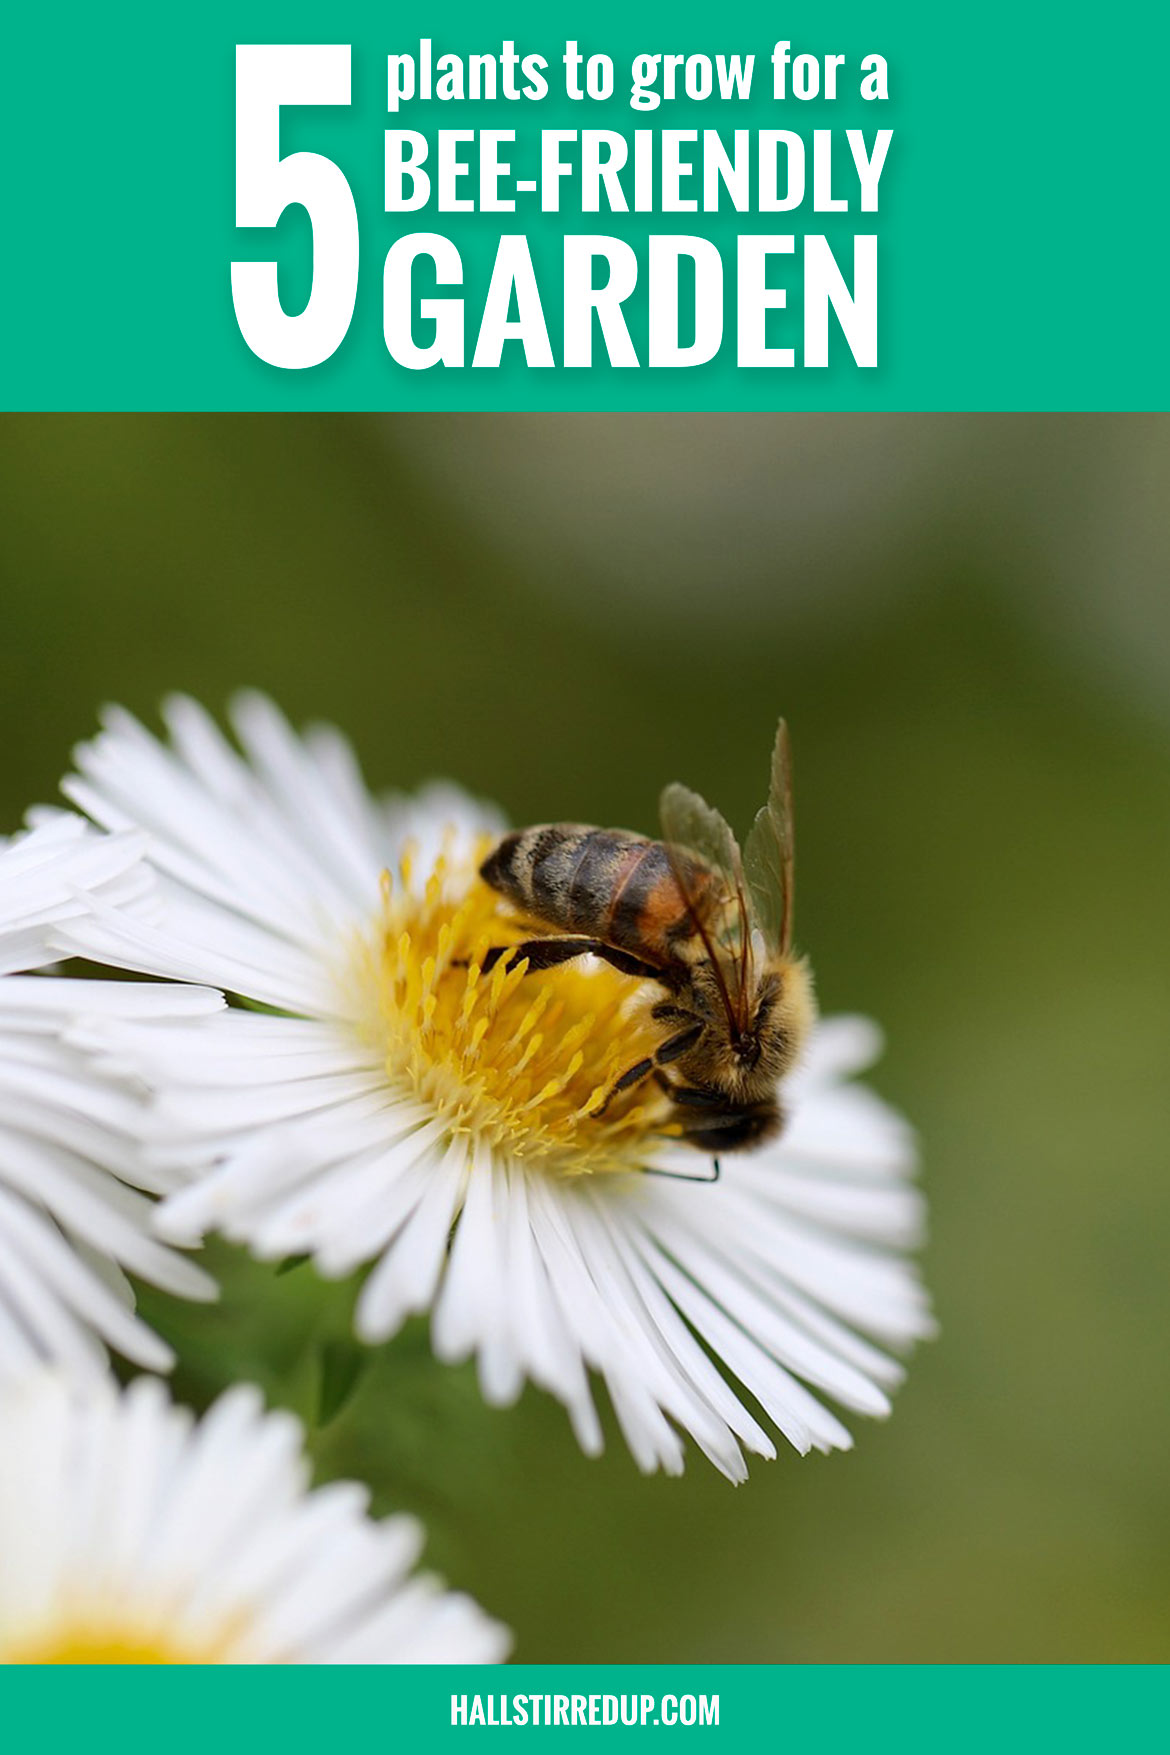 5 plants to grow for a bee-friendly garden